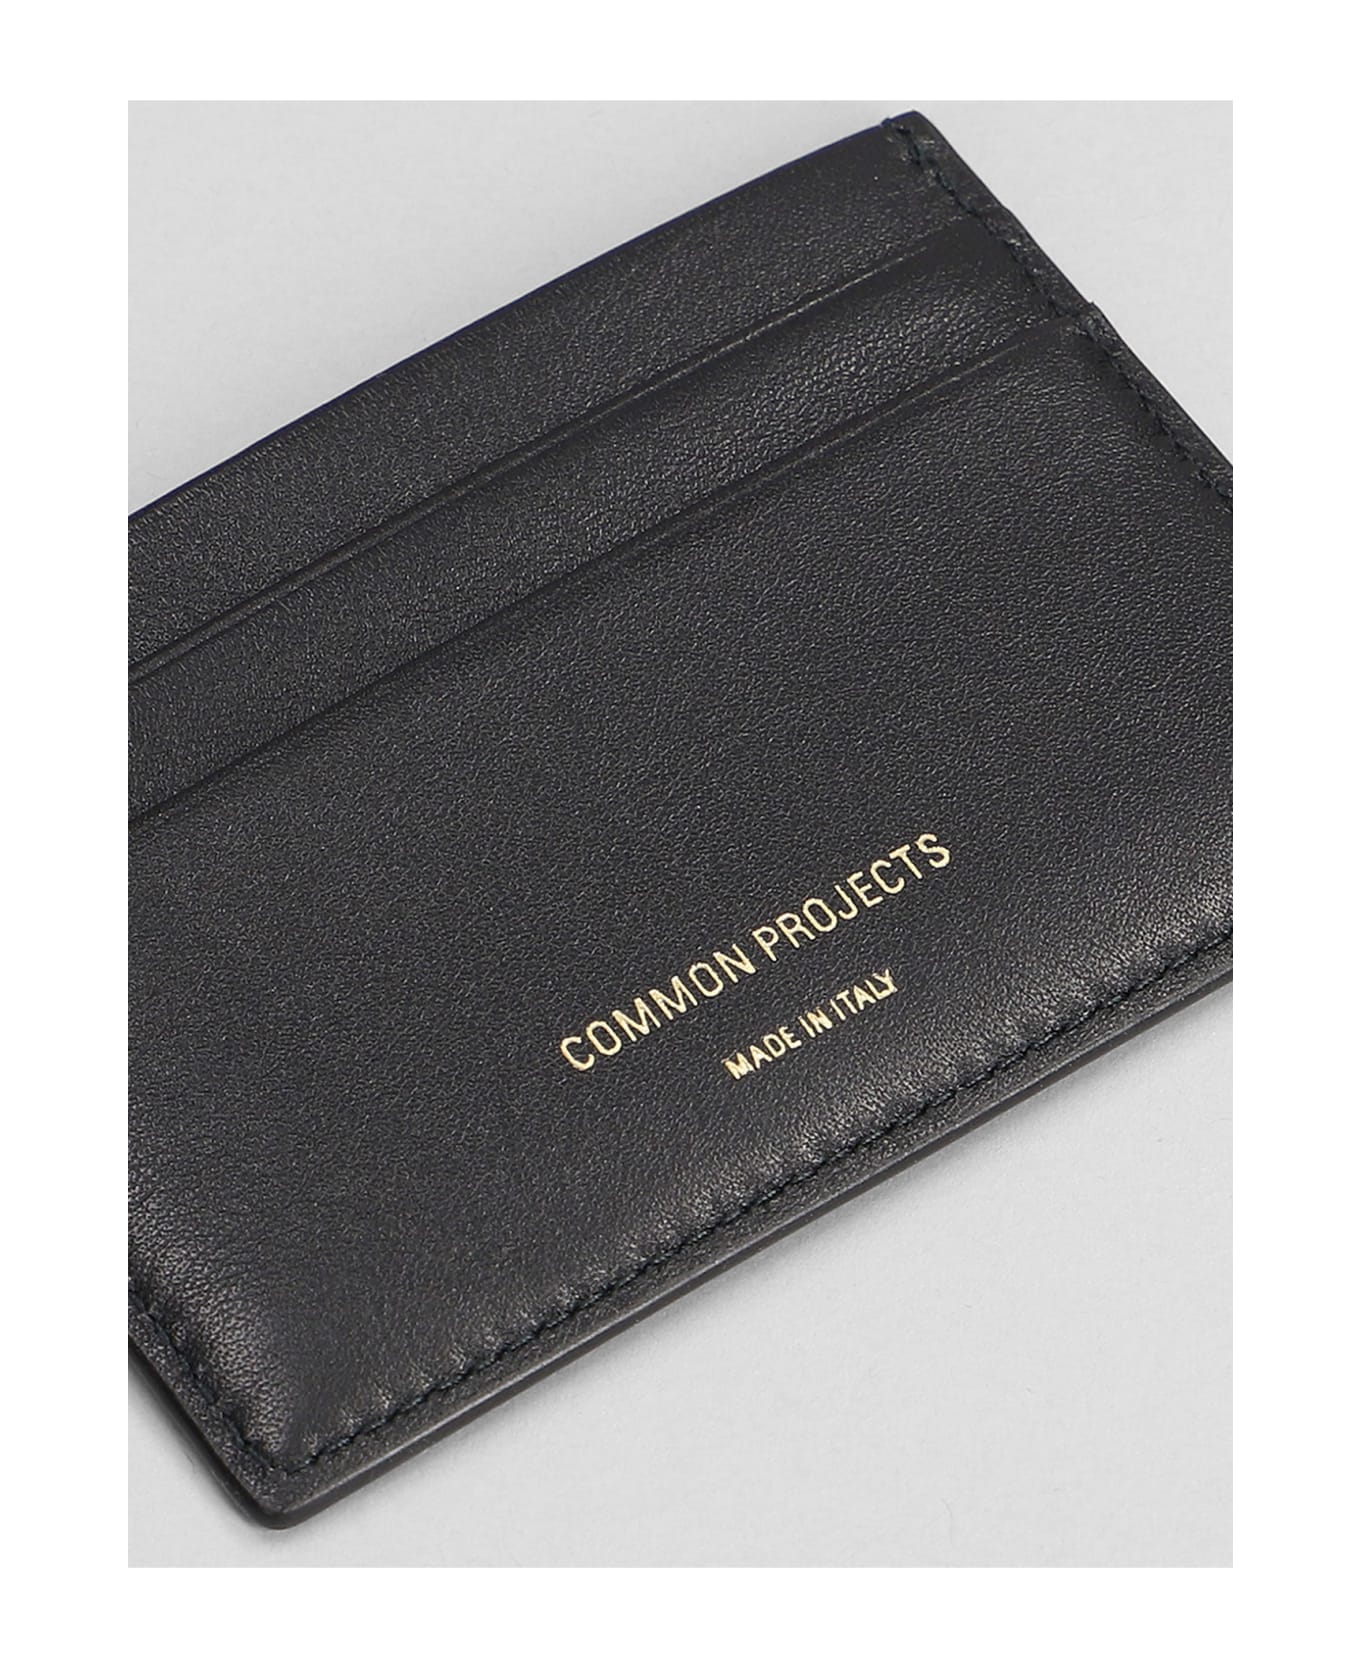 Common Projects Wallet In Black Leather - black